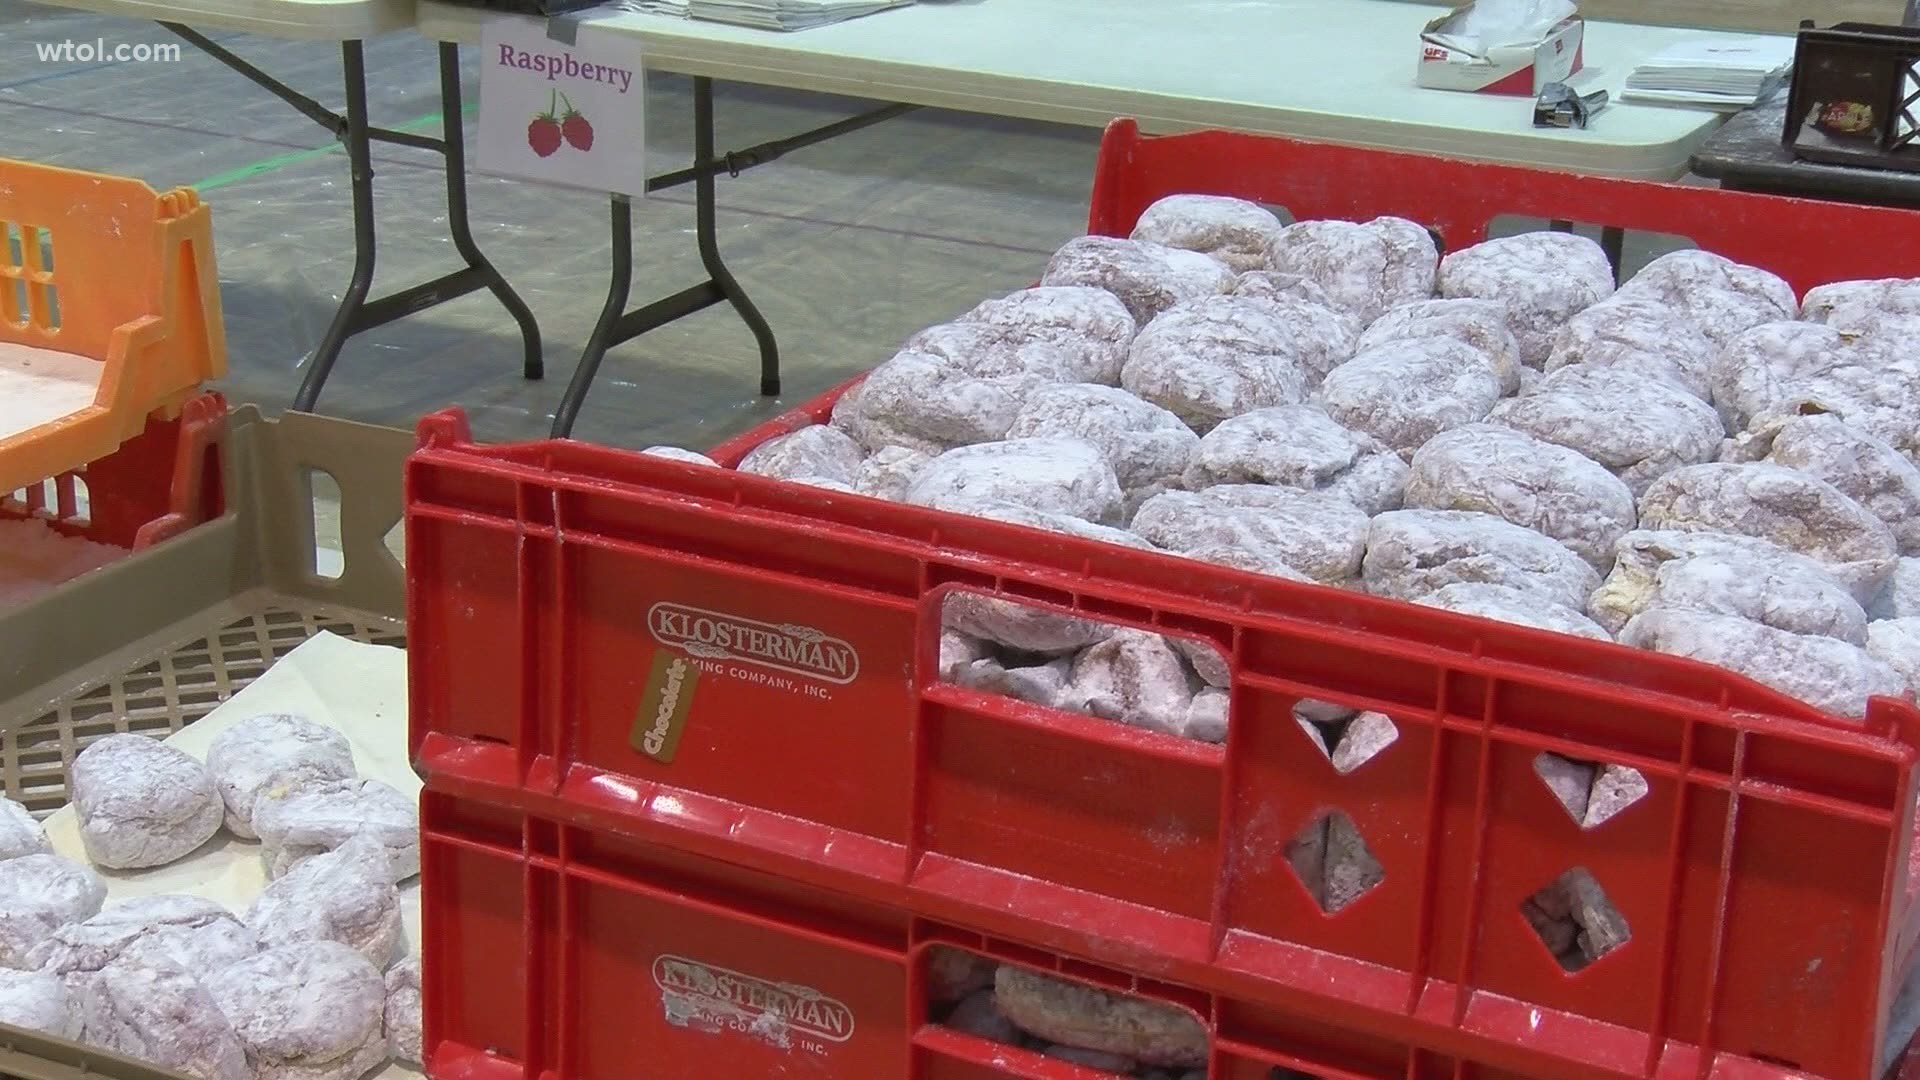 The ONE Village Council board voted to postpone the annual paczki fundraiser until 2022 due to the ongoing pandemic. But, you can still donate to the neighborhood.